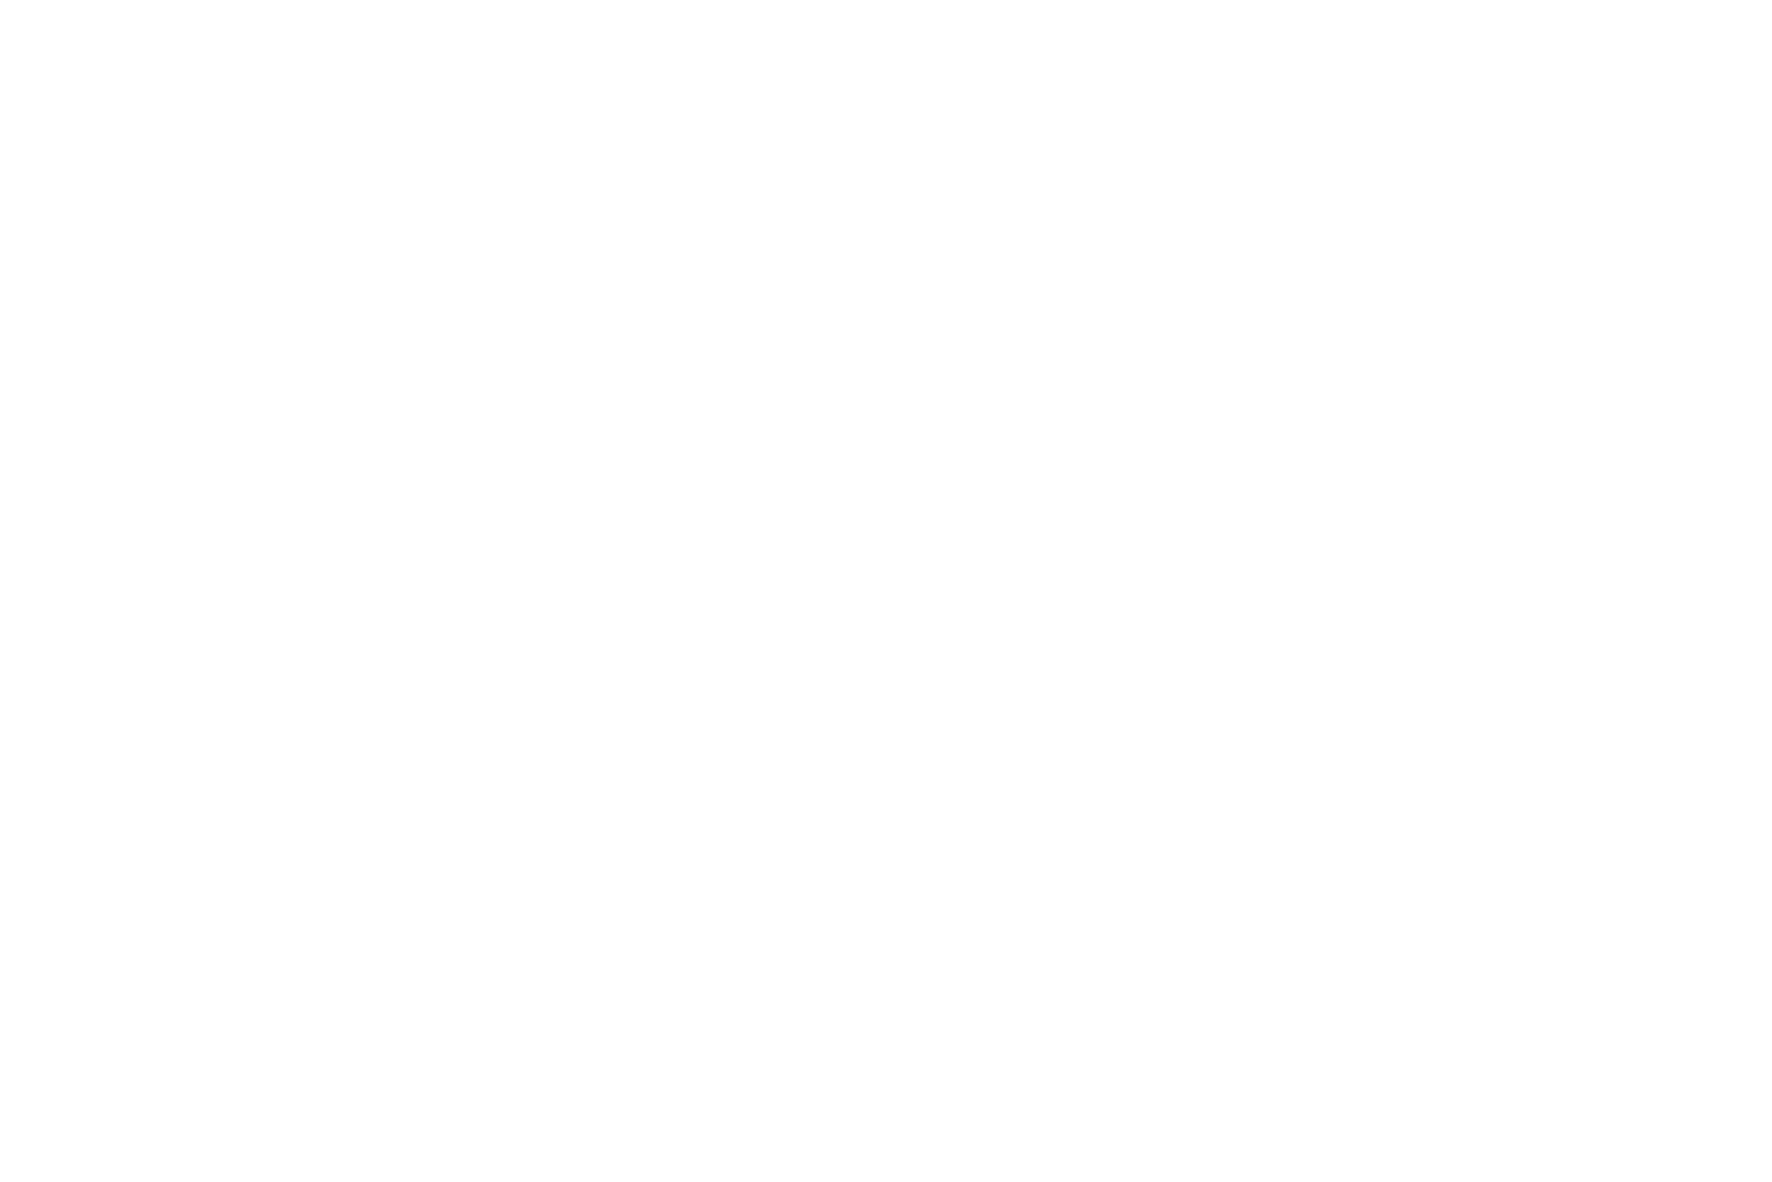 101 Group - Digital NEXA Consulting Client